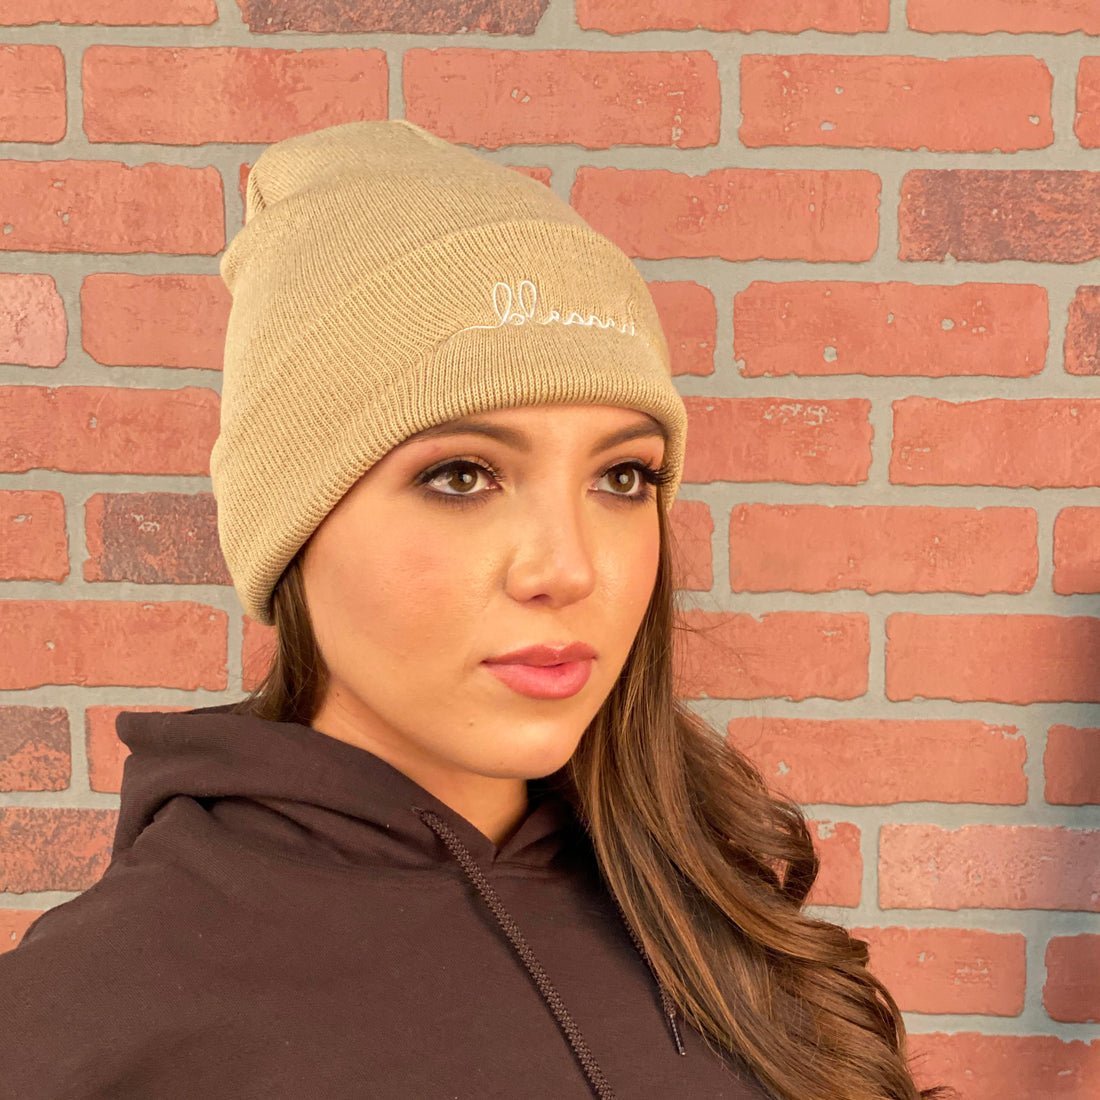 Unisex Blessed Cuffed Beanie Hat, Embroidered Beanie Cap, Cuffed Beanie, Blessed Beanie Hat, Custom Embroidery, Blessed, Thanksgiving Hat, Cursive Text, Embroidered Text, Tan Beanie Cap Hat, DSY Lifestyle Beanie, Made in LA